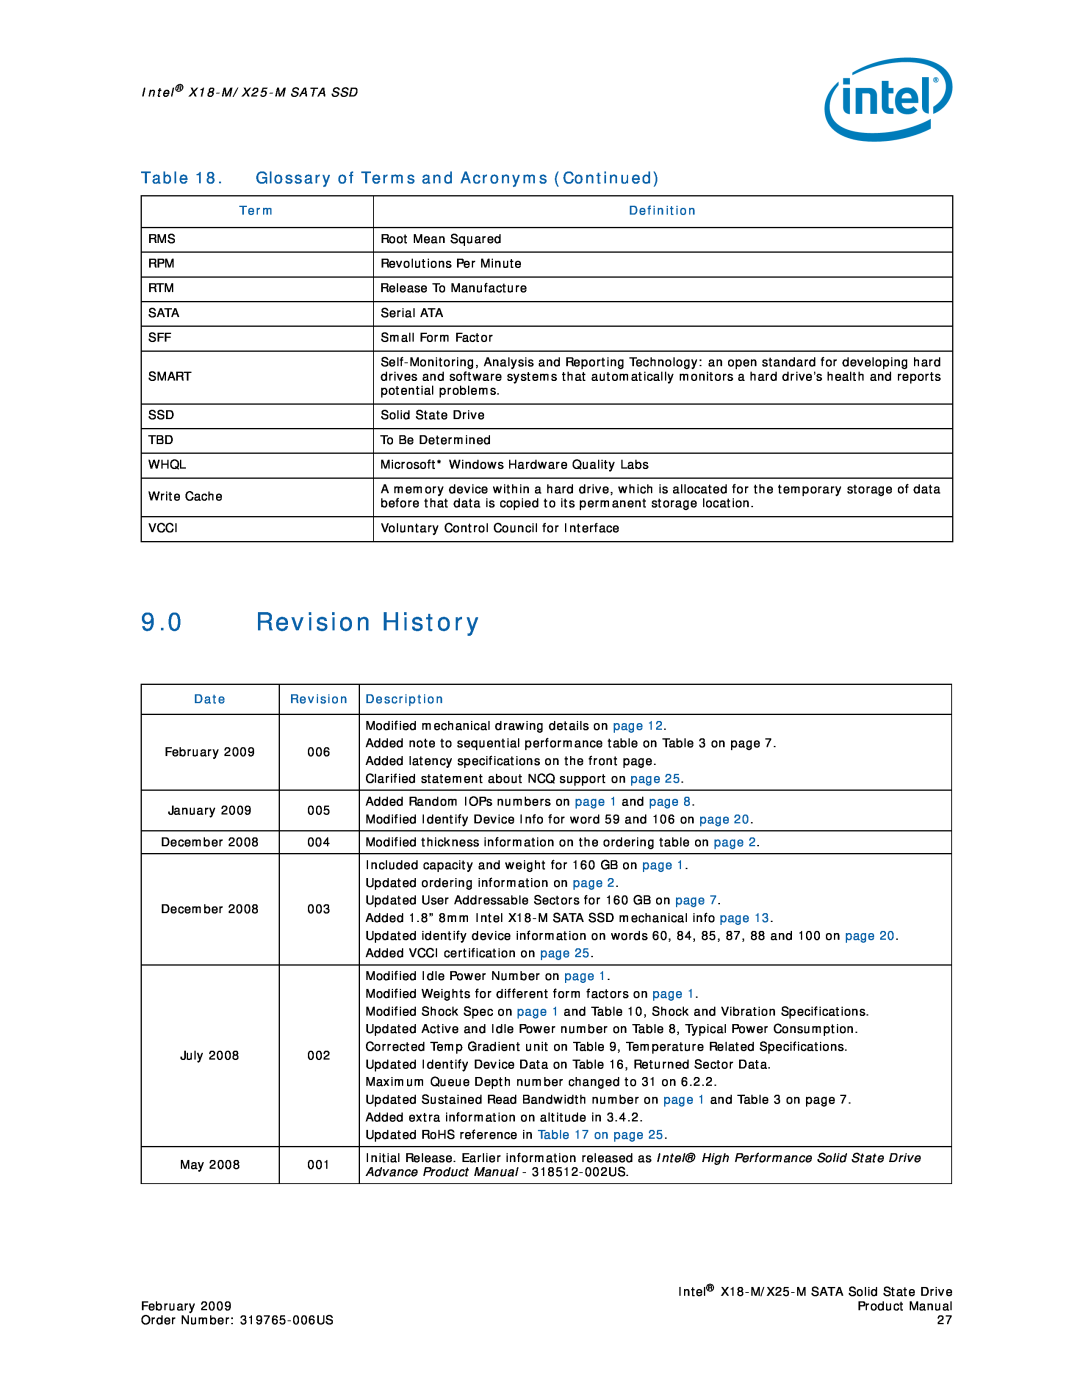 Intel specifications 9.0Revision History, Glossary of Terms and Acronyms Continued, Intel X18-M/X25-MSATA SSD 